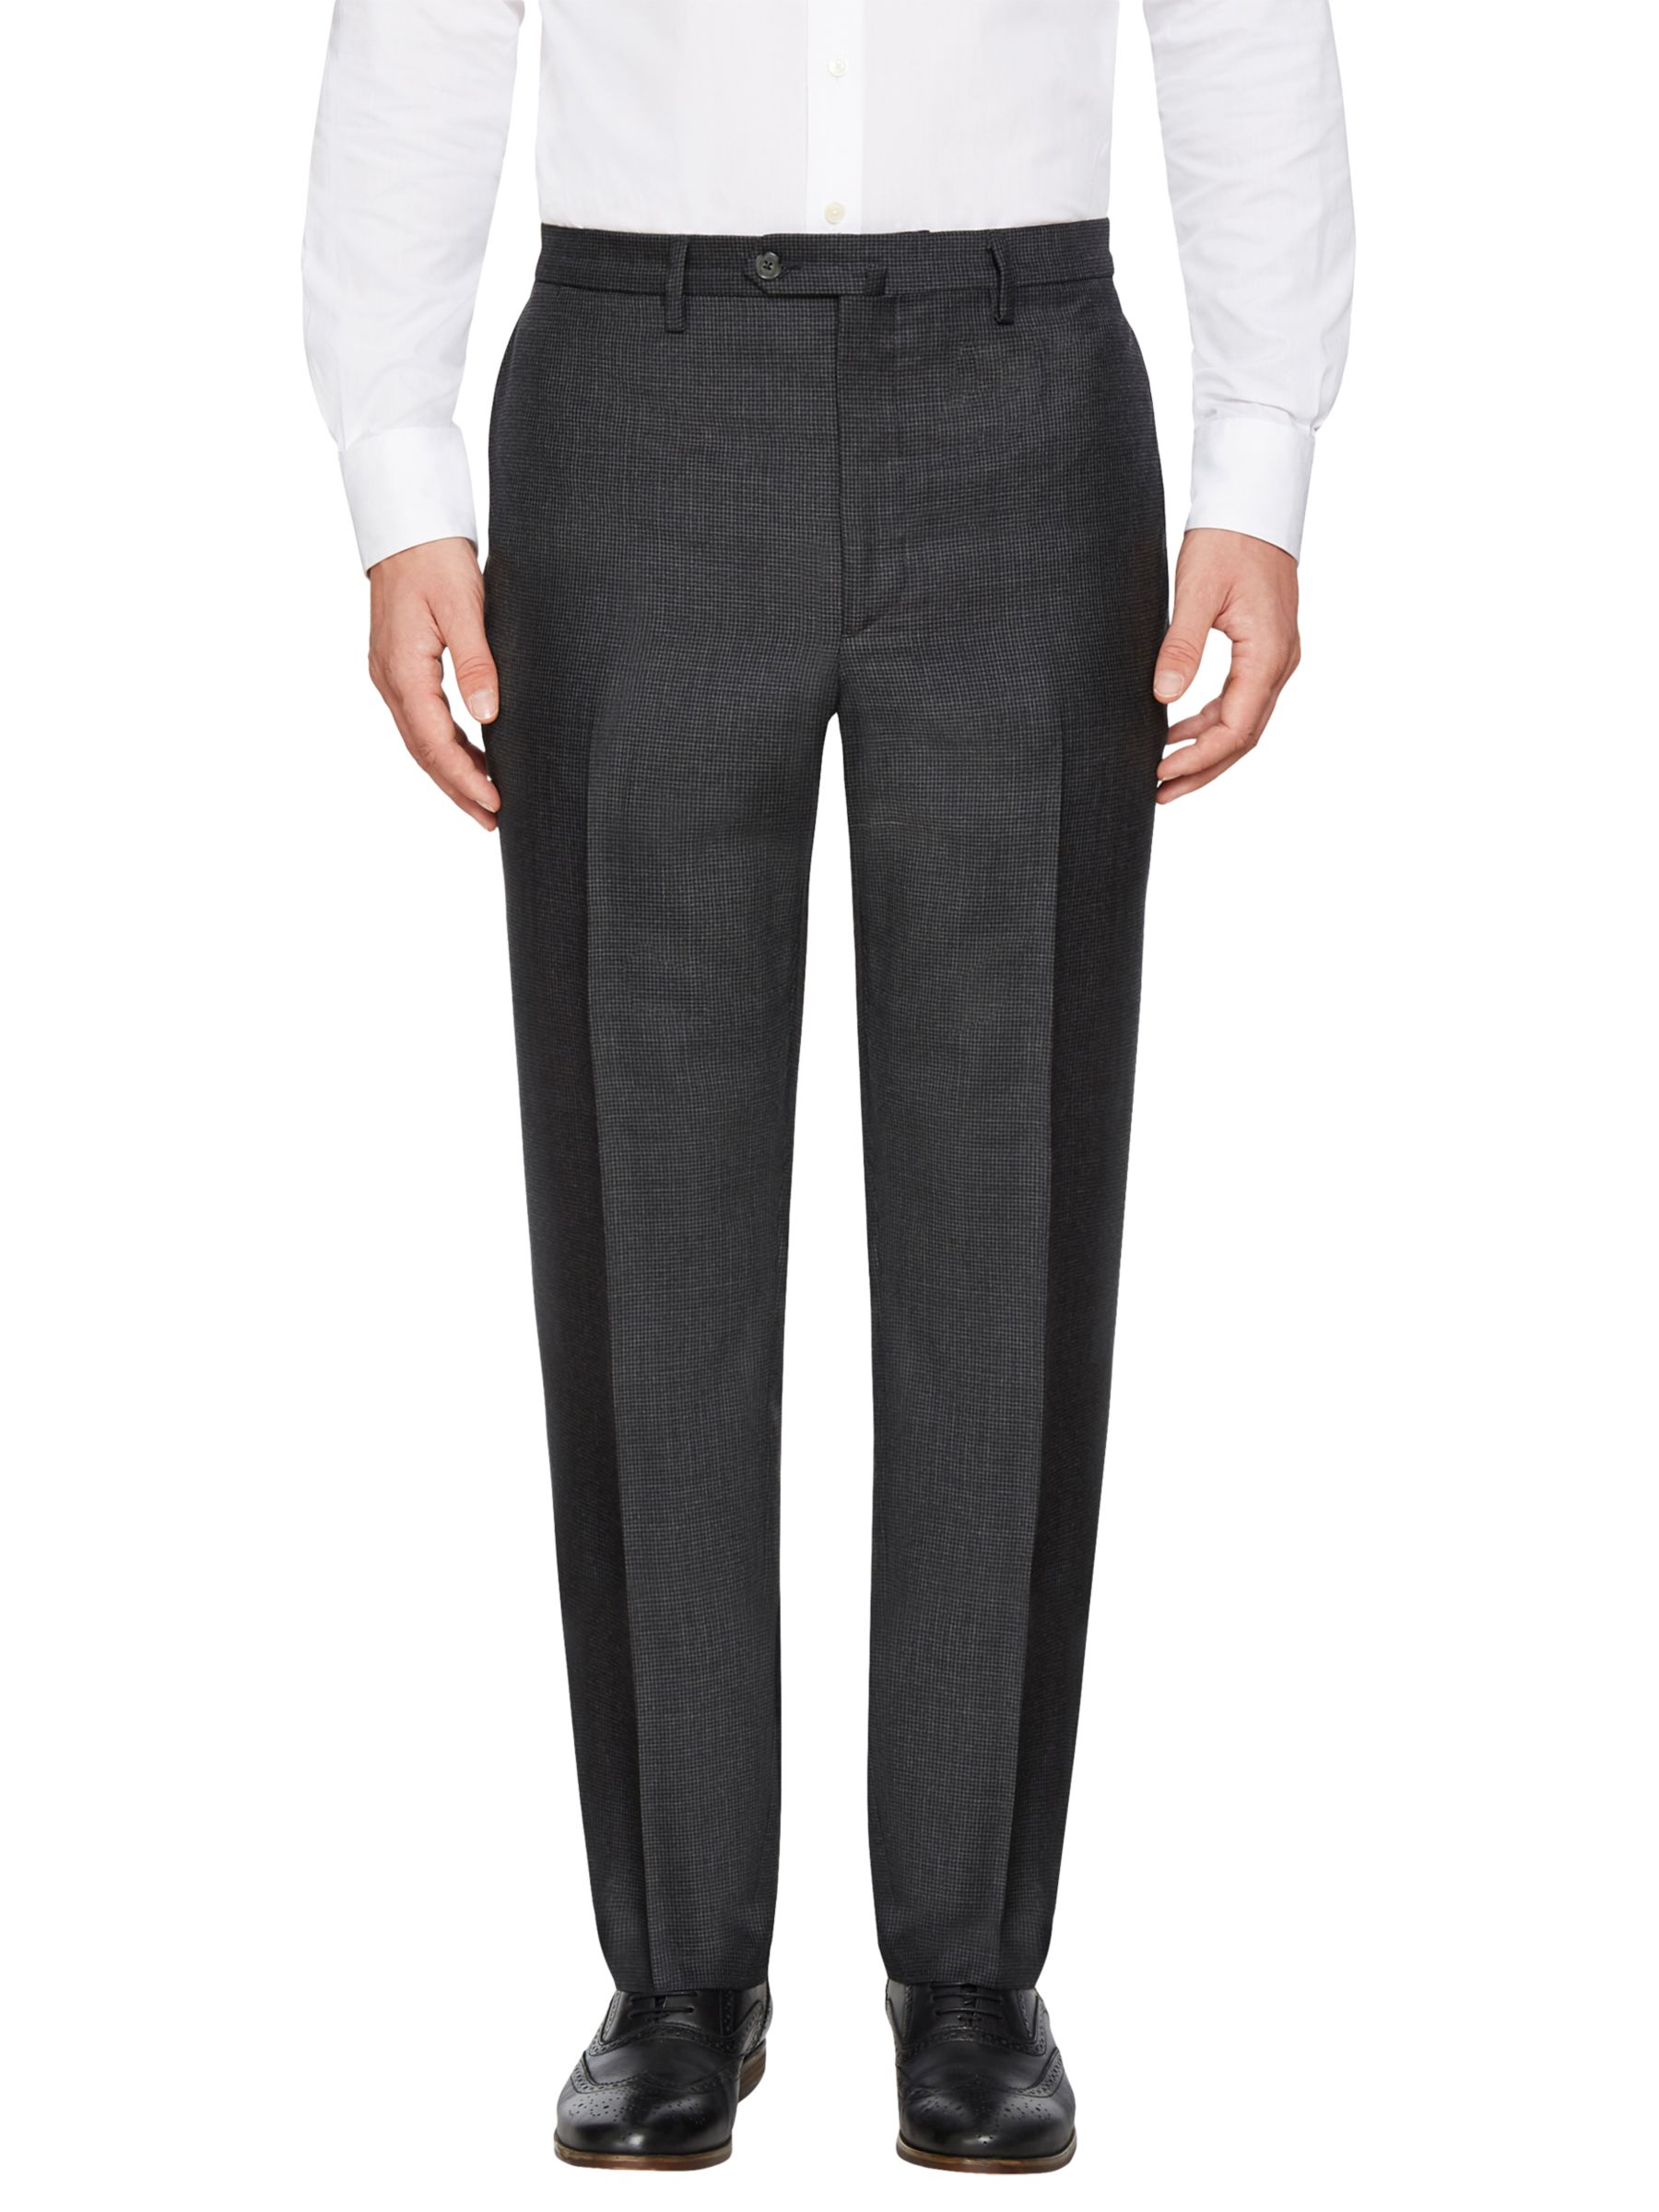 Hackett London Wool Puppytooth Regular Fit Suit Trousers, Charcoal, 38L